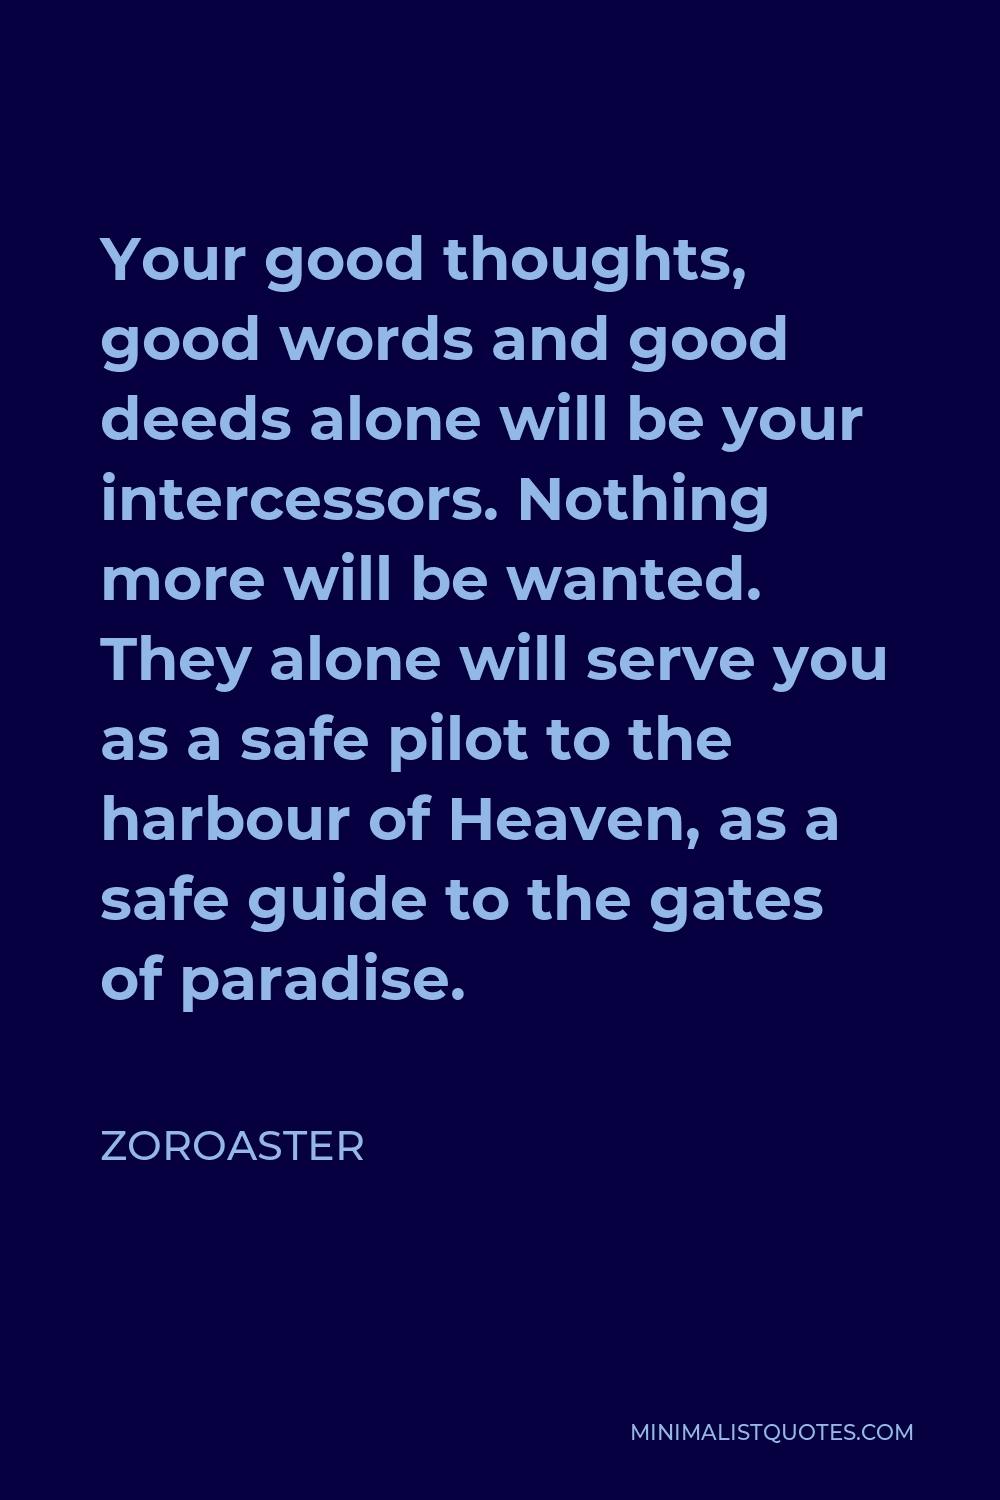 Zoroaster Quote - Your good thoughts, good words and good deeds alone will be your intercessors. Nothing more will be wanted. They alone will serve you as a safe pilot to the harbour of Heaven, as a safe guide to the gates of paradise.